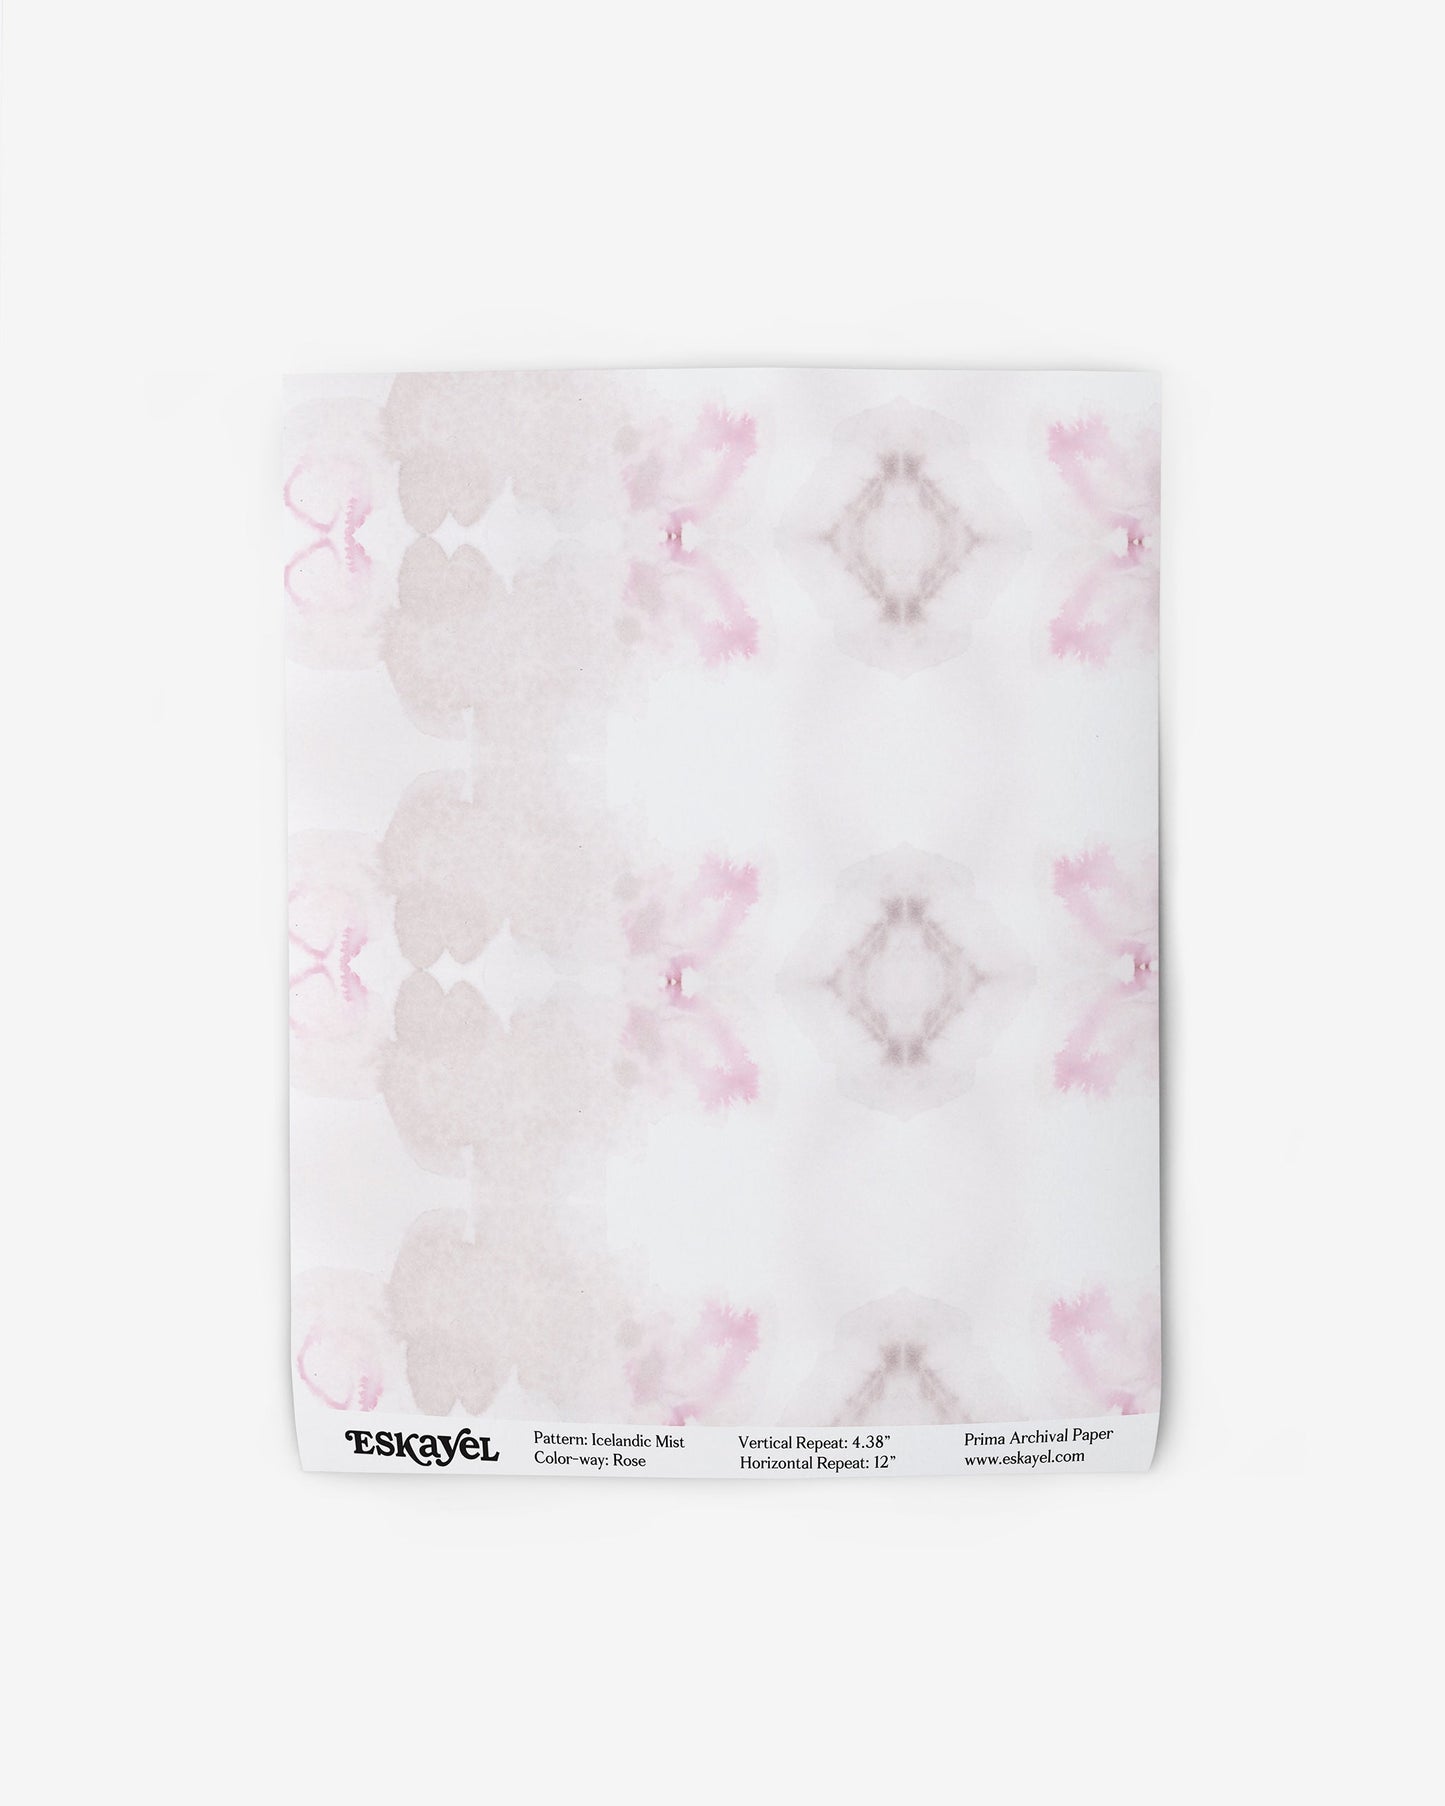 A pink and white Icelandic Mist Wallpaper Rose with a floral pattern, featuring an abstract aesthetic